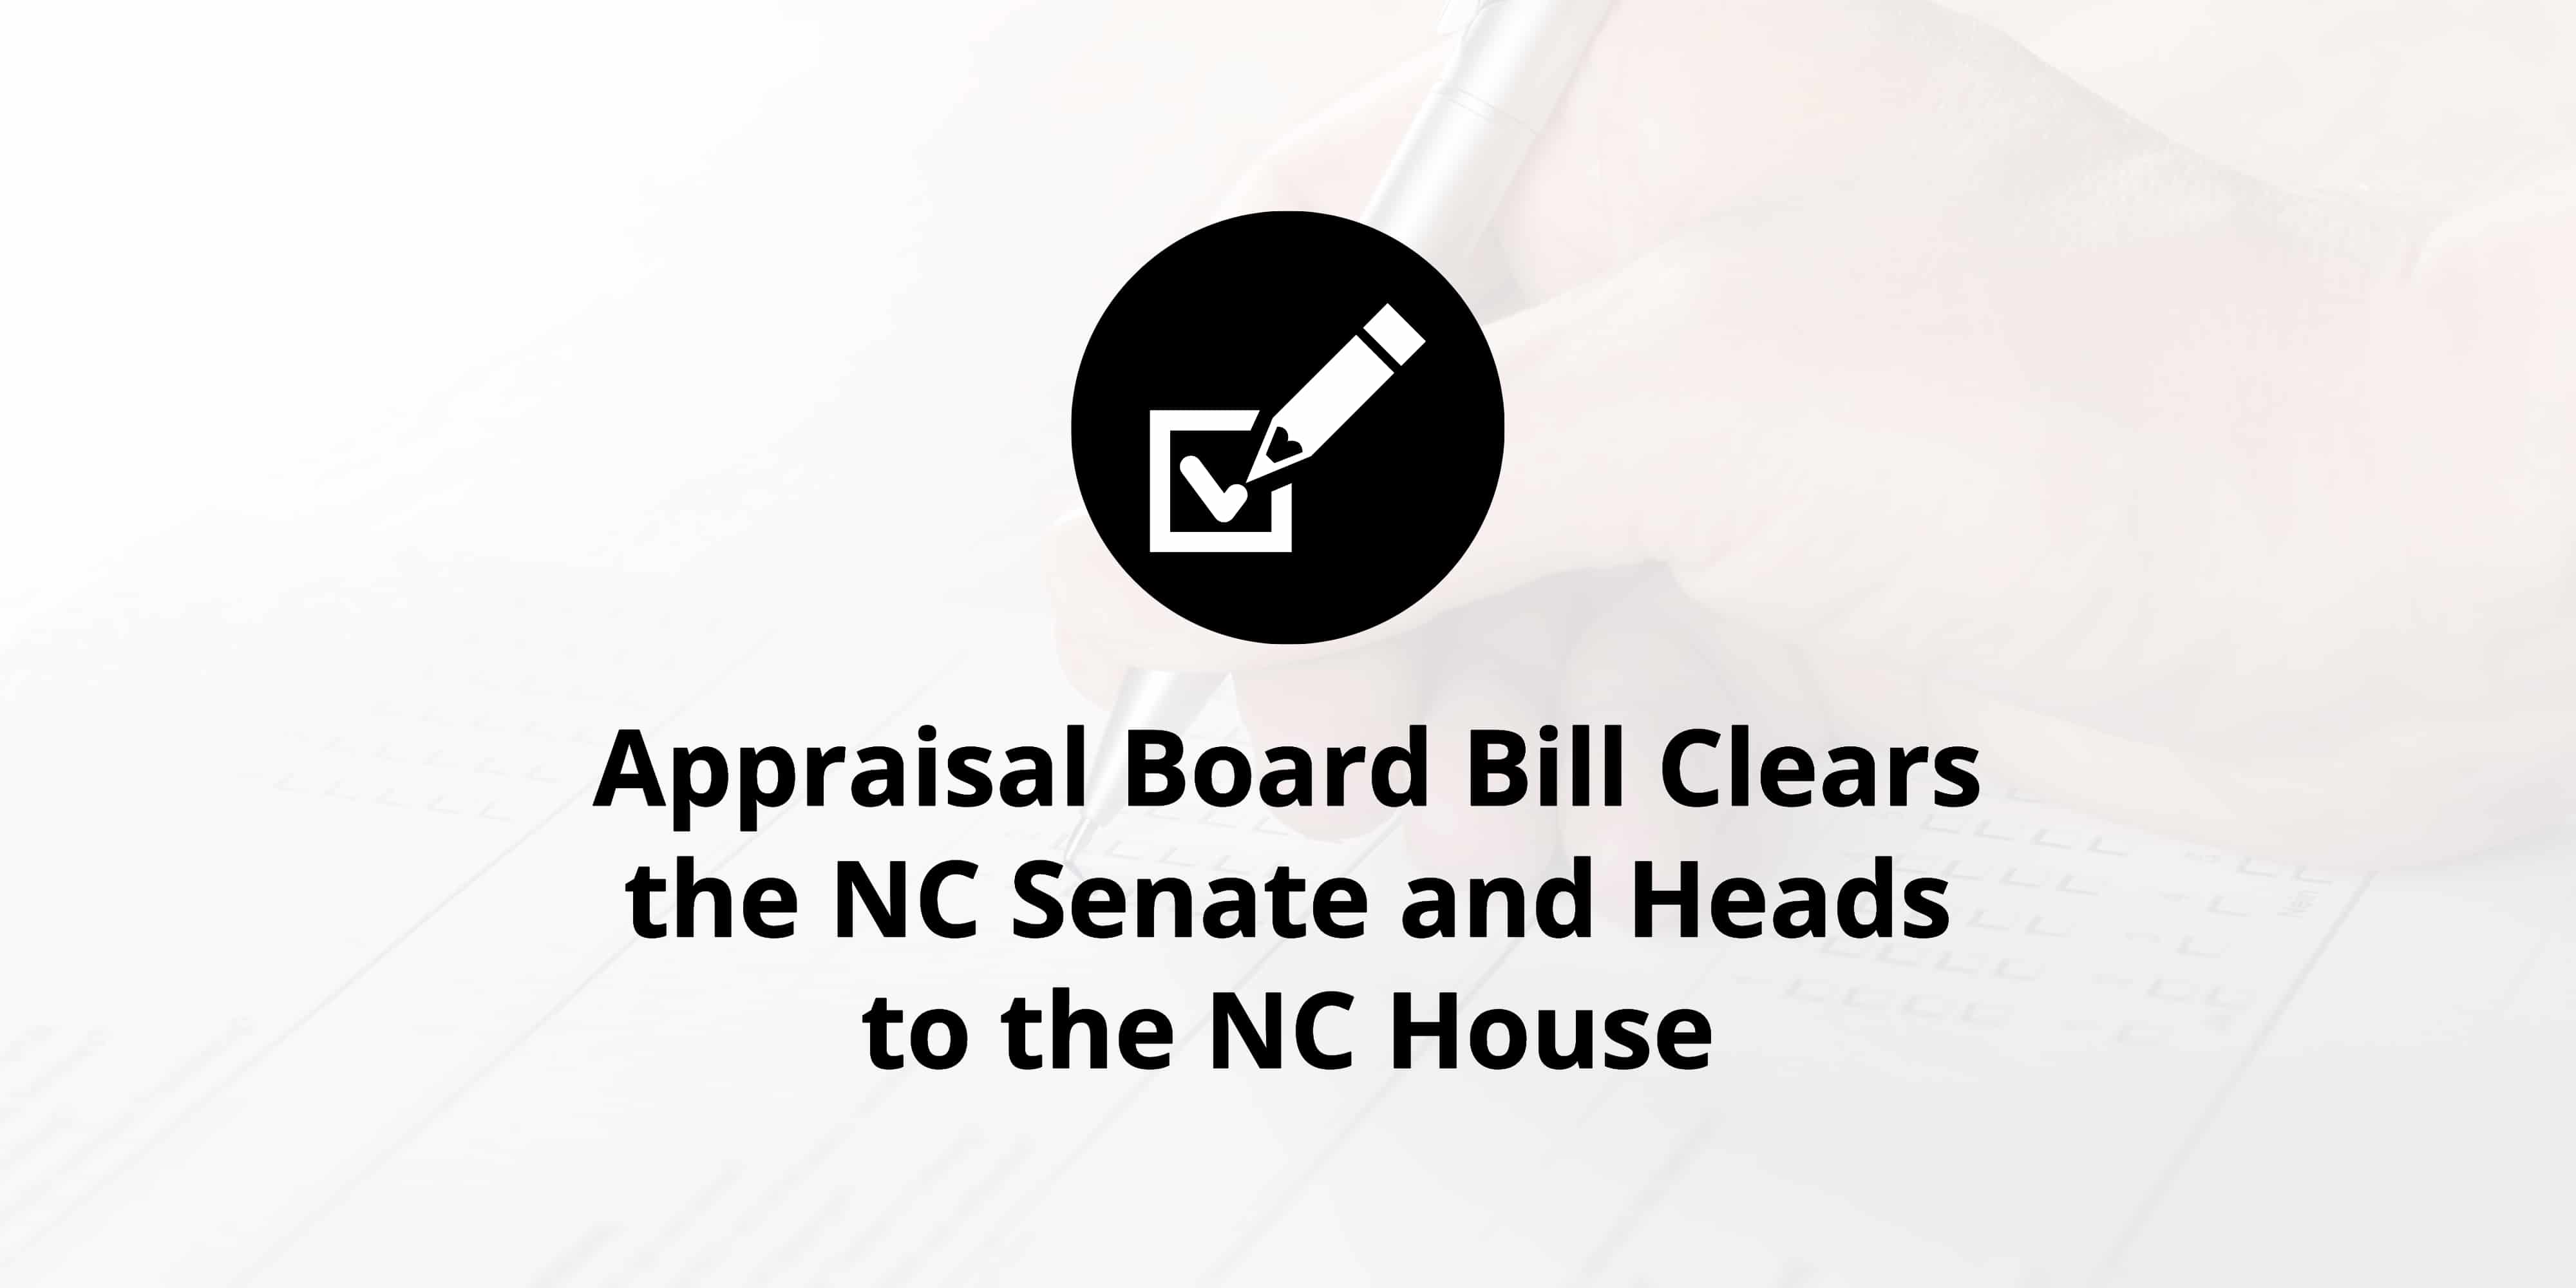 Appraisal Board Bill Clears the NC Senate and Heads to the NC House